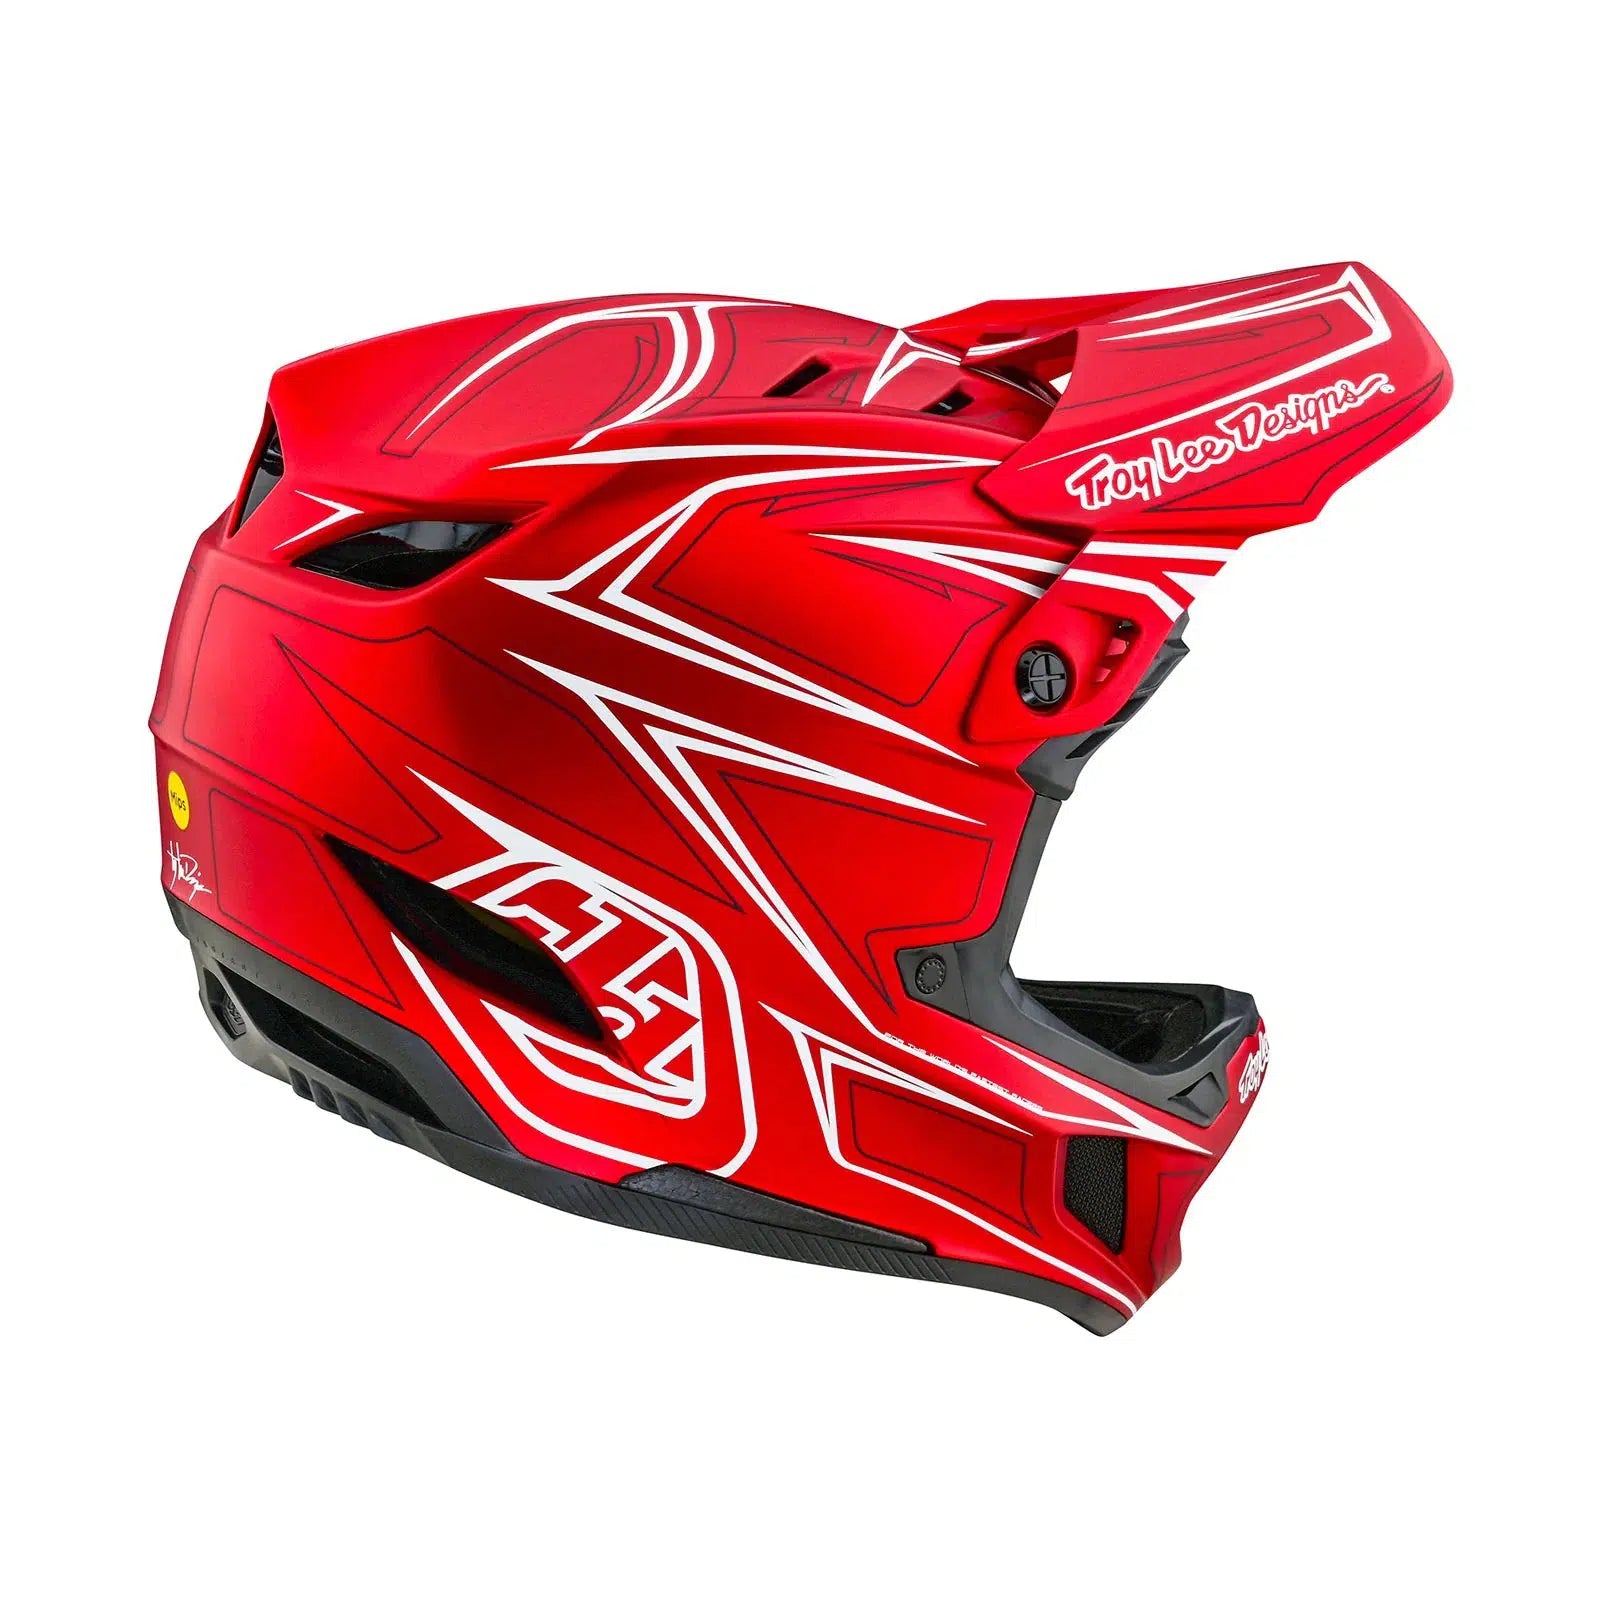 A TLD D4 AS Composite Helmet W/MIPS Pinned Red with Mips C2 protection system on a white background.